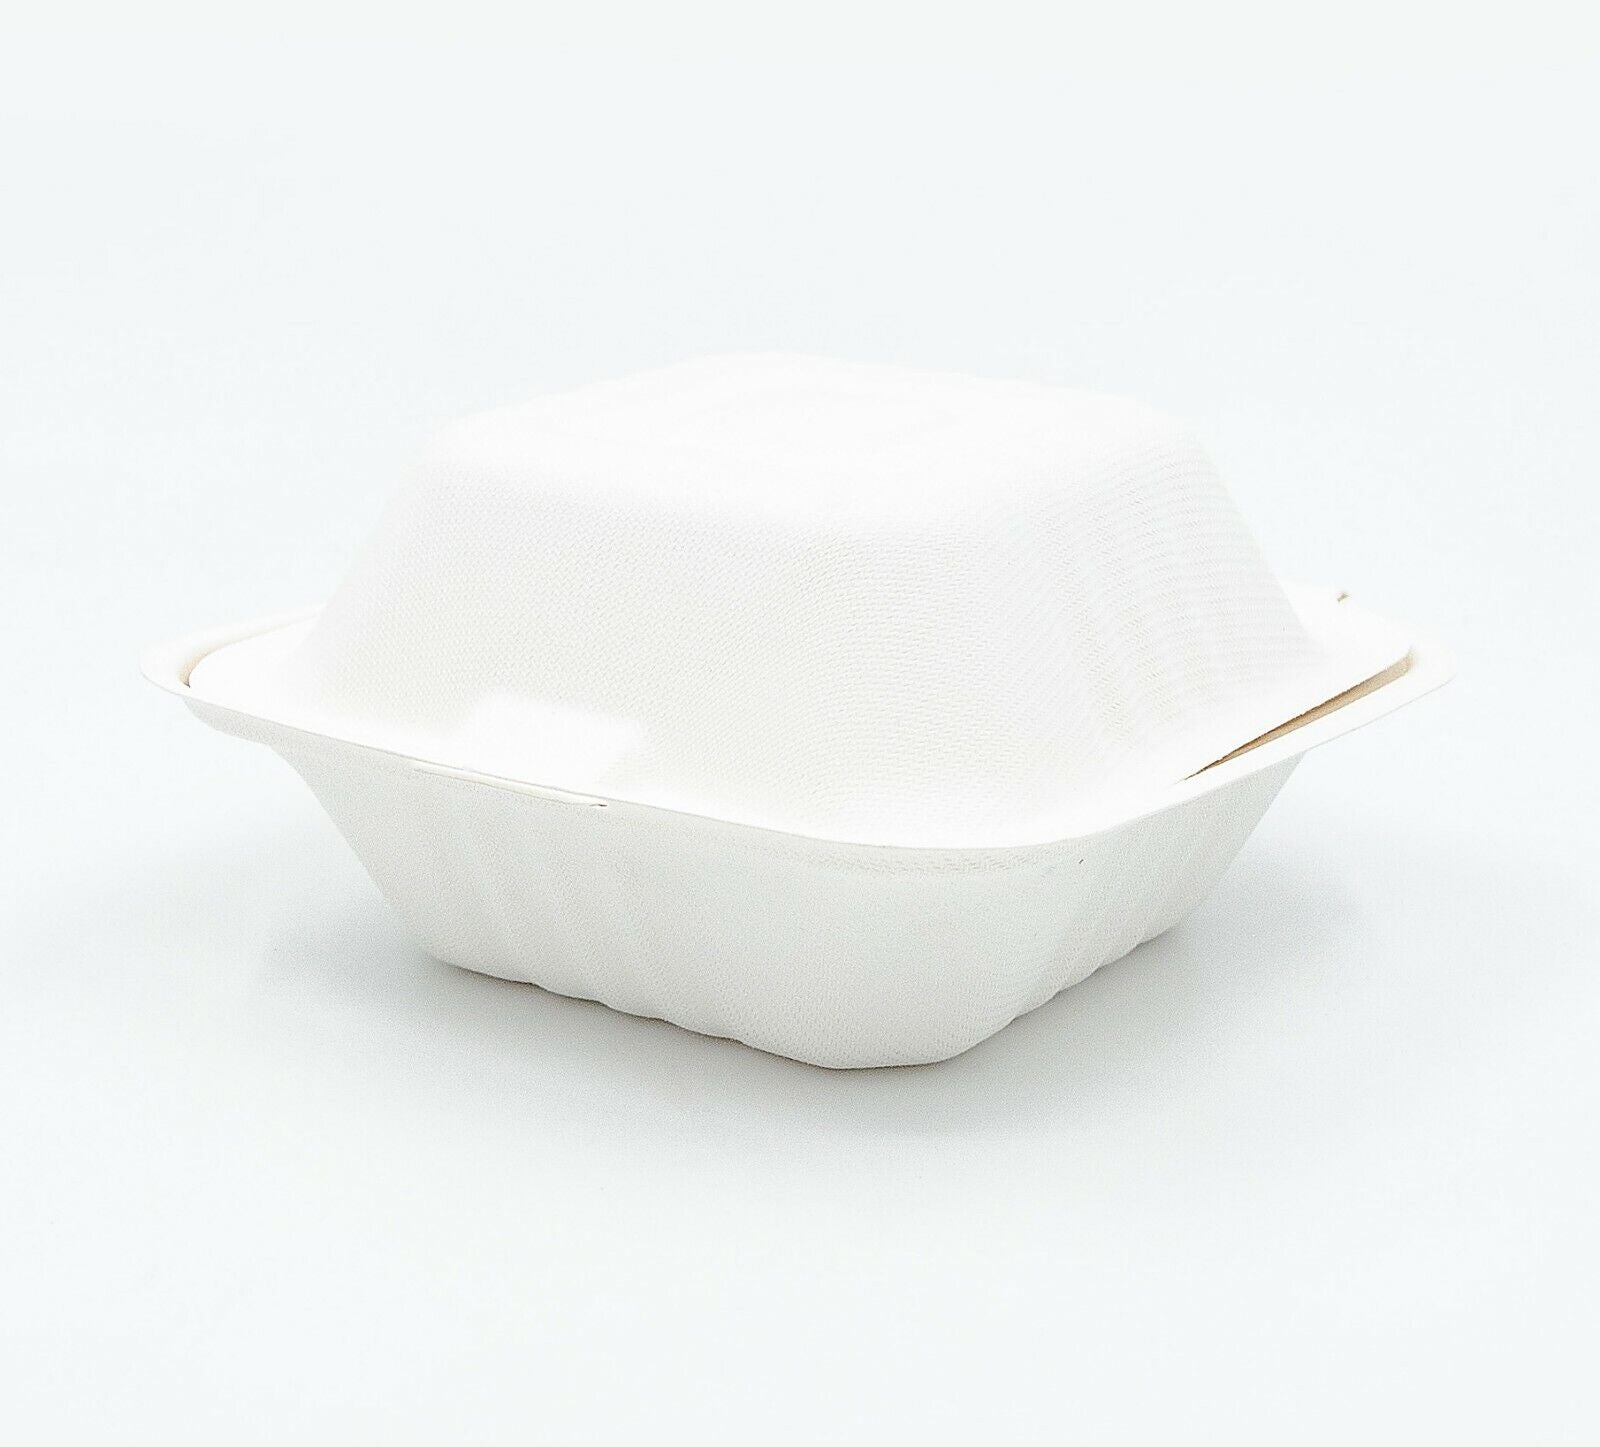 6 x 6 x 3 Sugarcane Clamshell Compostable Takeaway Food Containers 663 x500